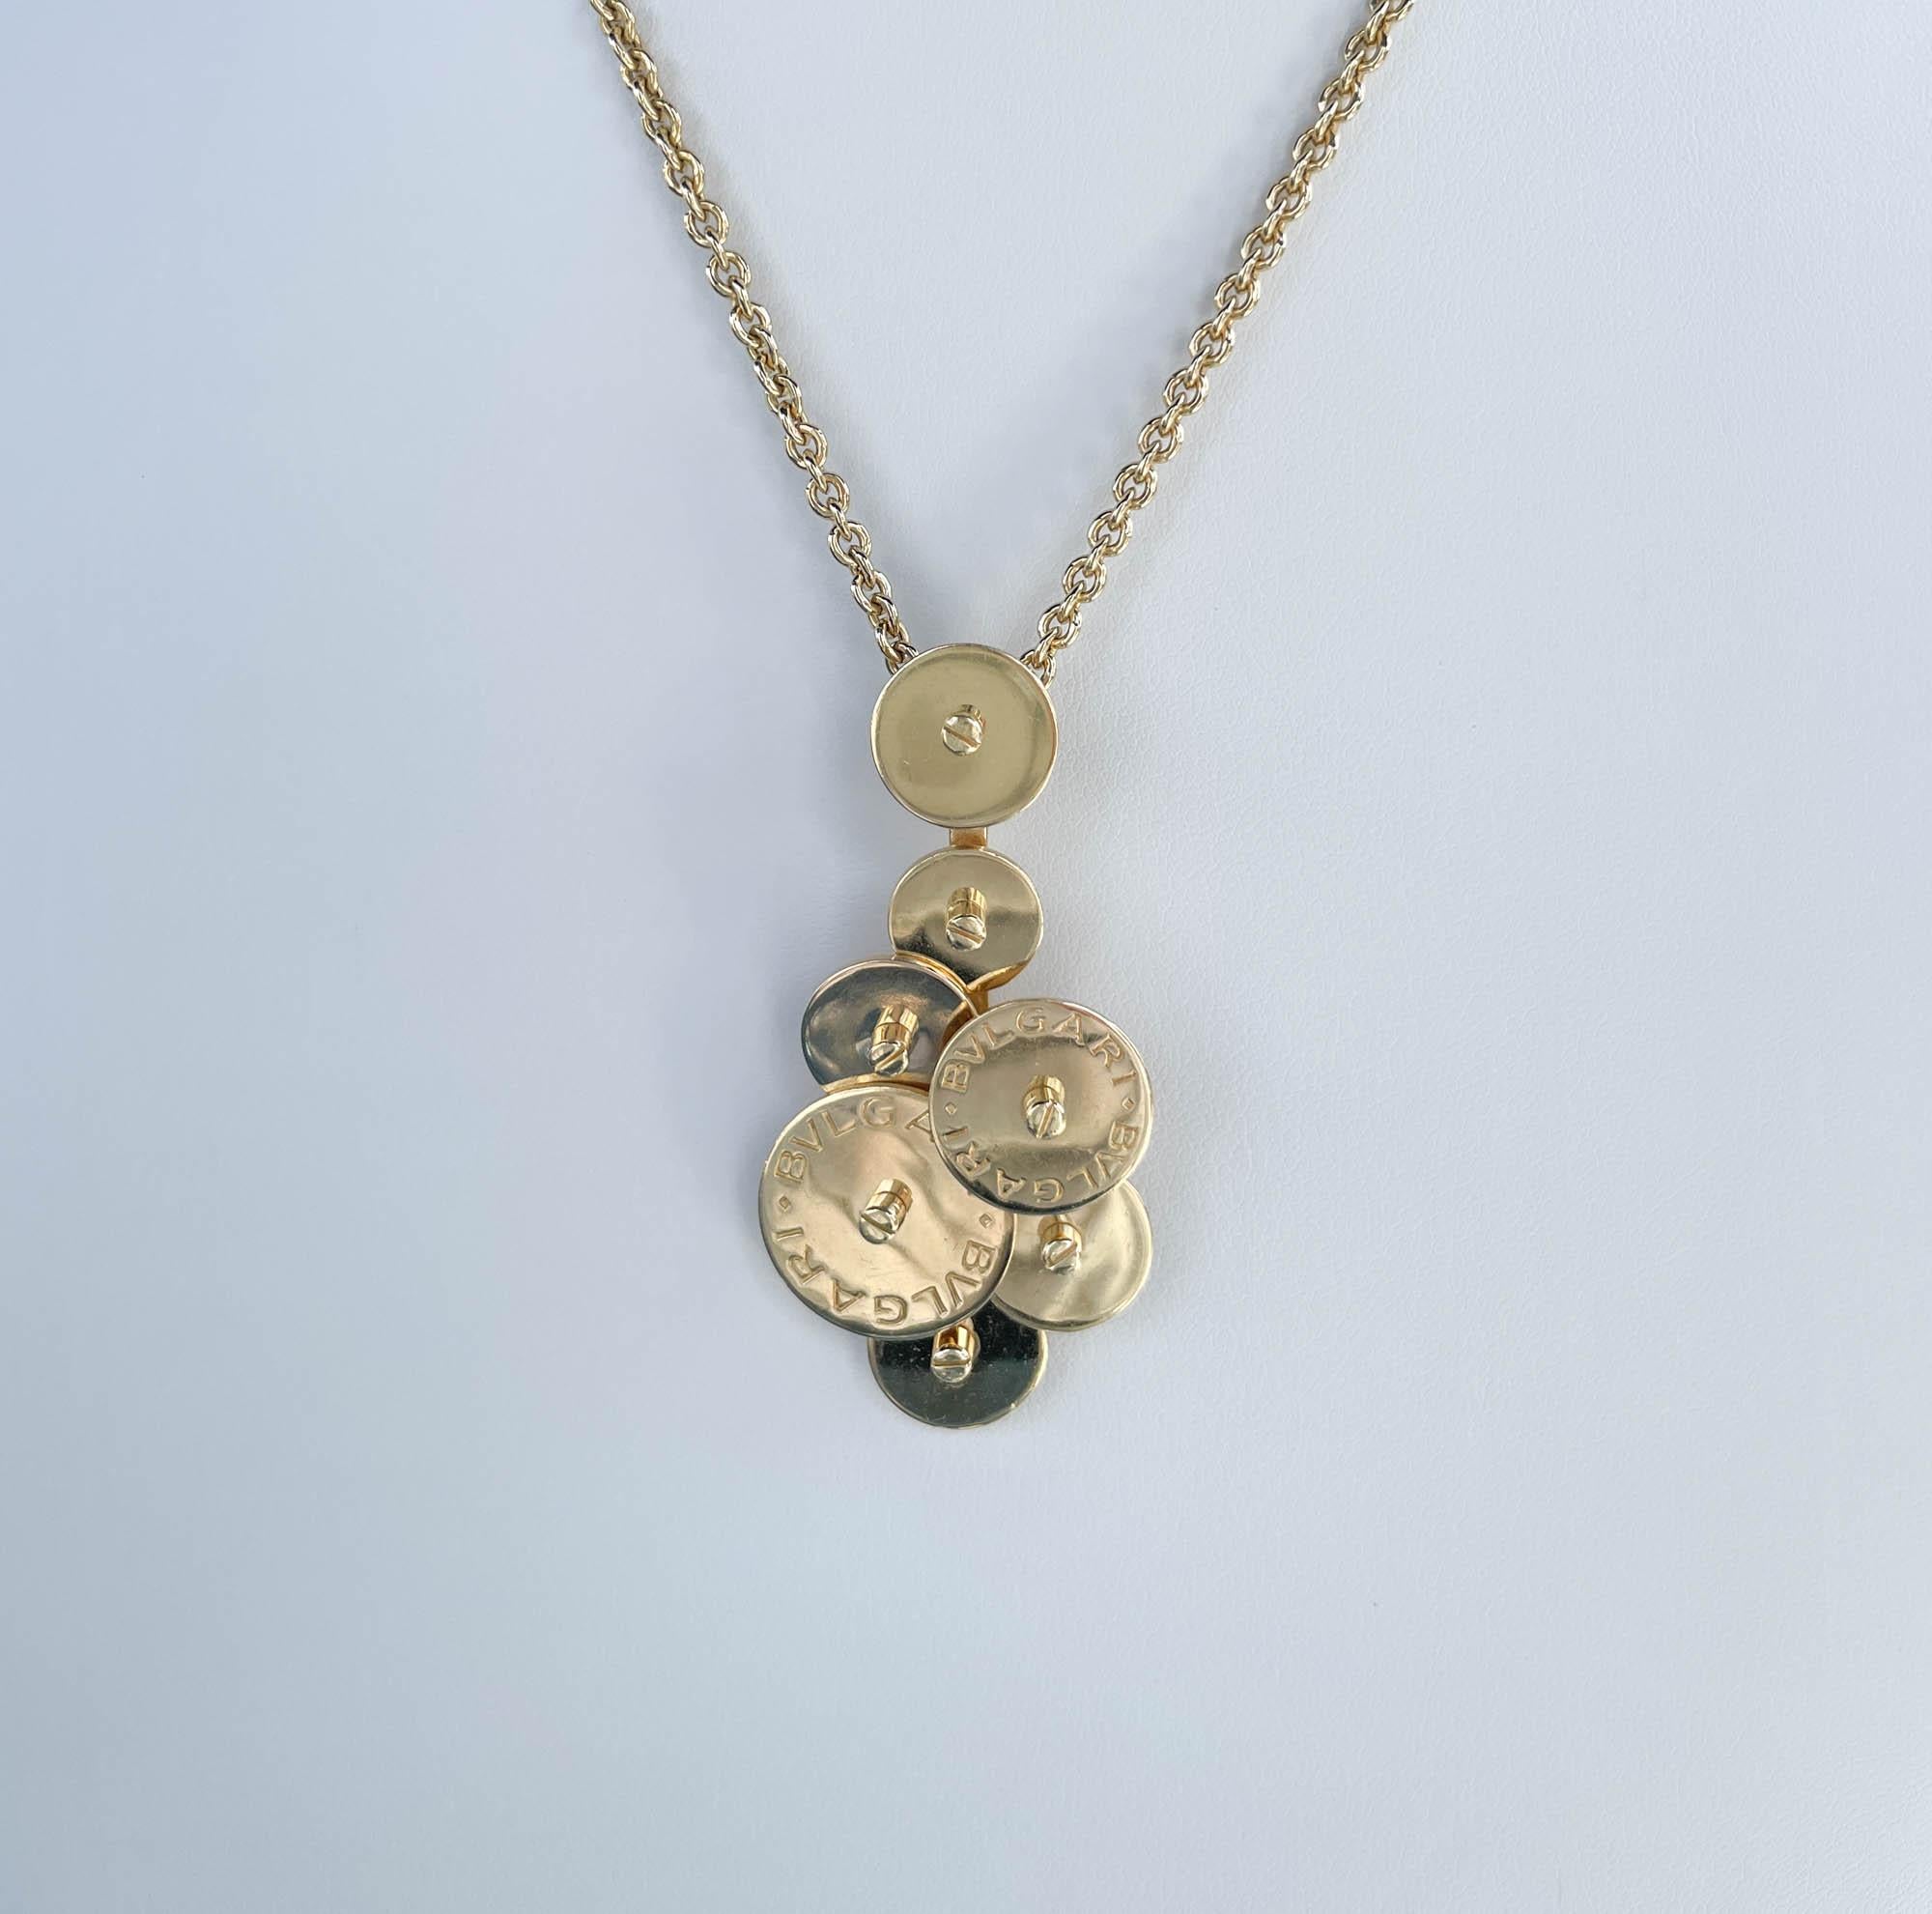 Jay Feder 18k Yellow Gold BVLGARI CICLADI Pendant Necklace
The necklace is 23-24-25 inches long (with bead extensions).
The pendant measures to 55x22mm.
The total weight of the necklace is 35.4 grams.

Please view our photos and videos for more